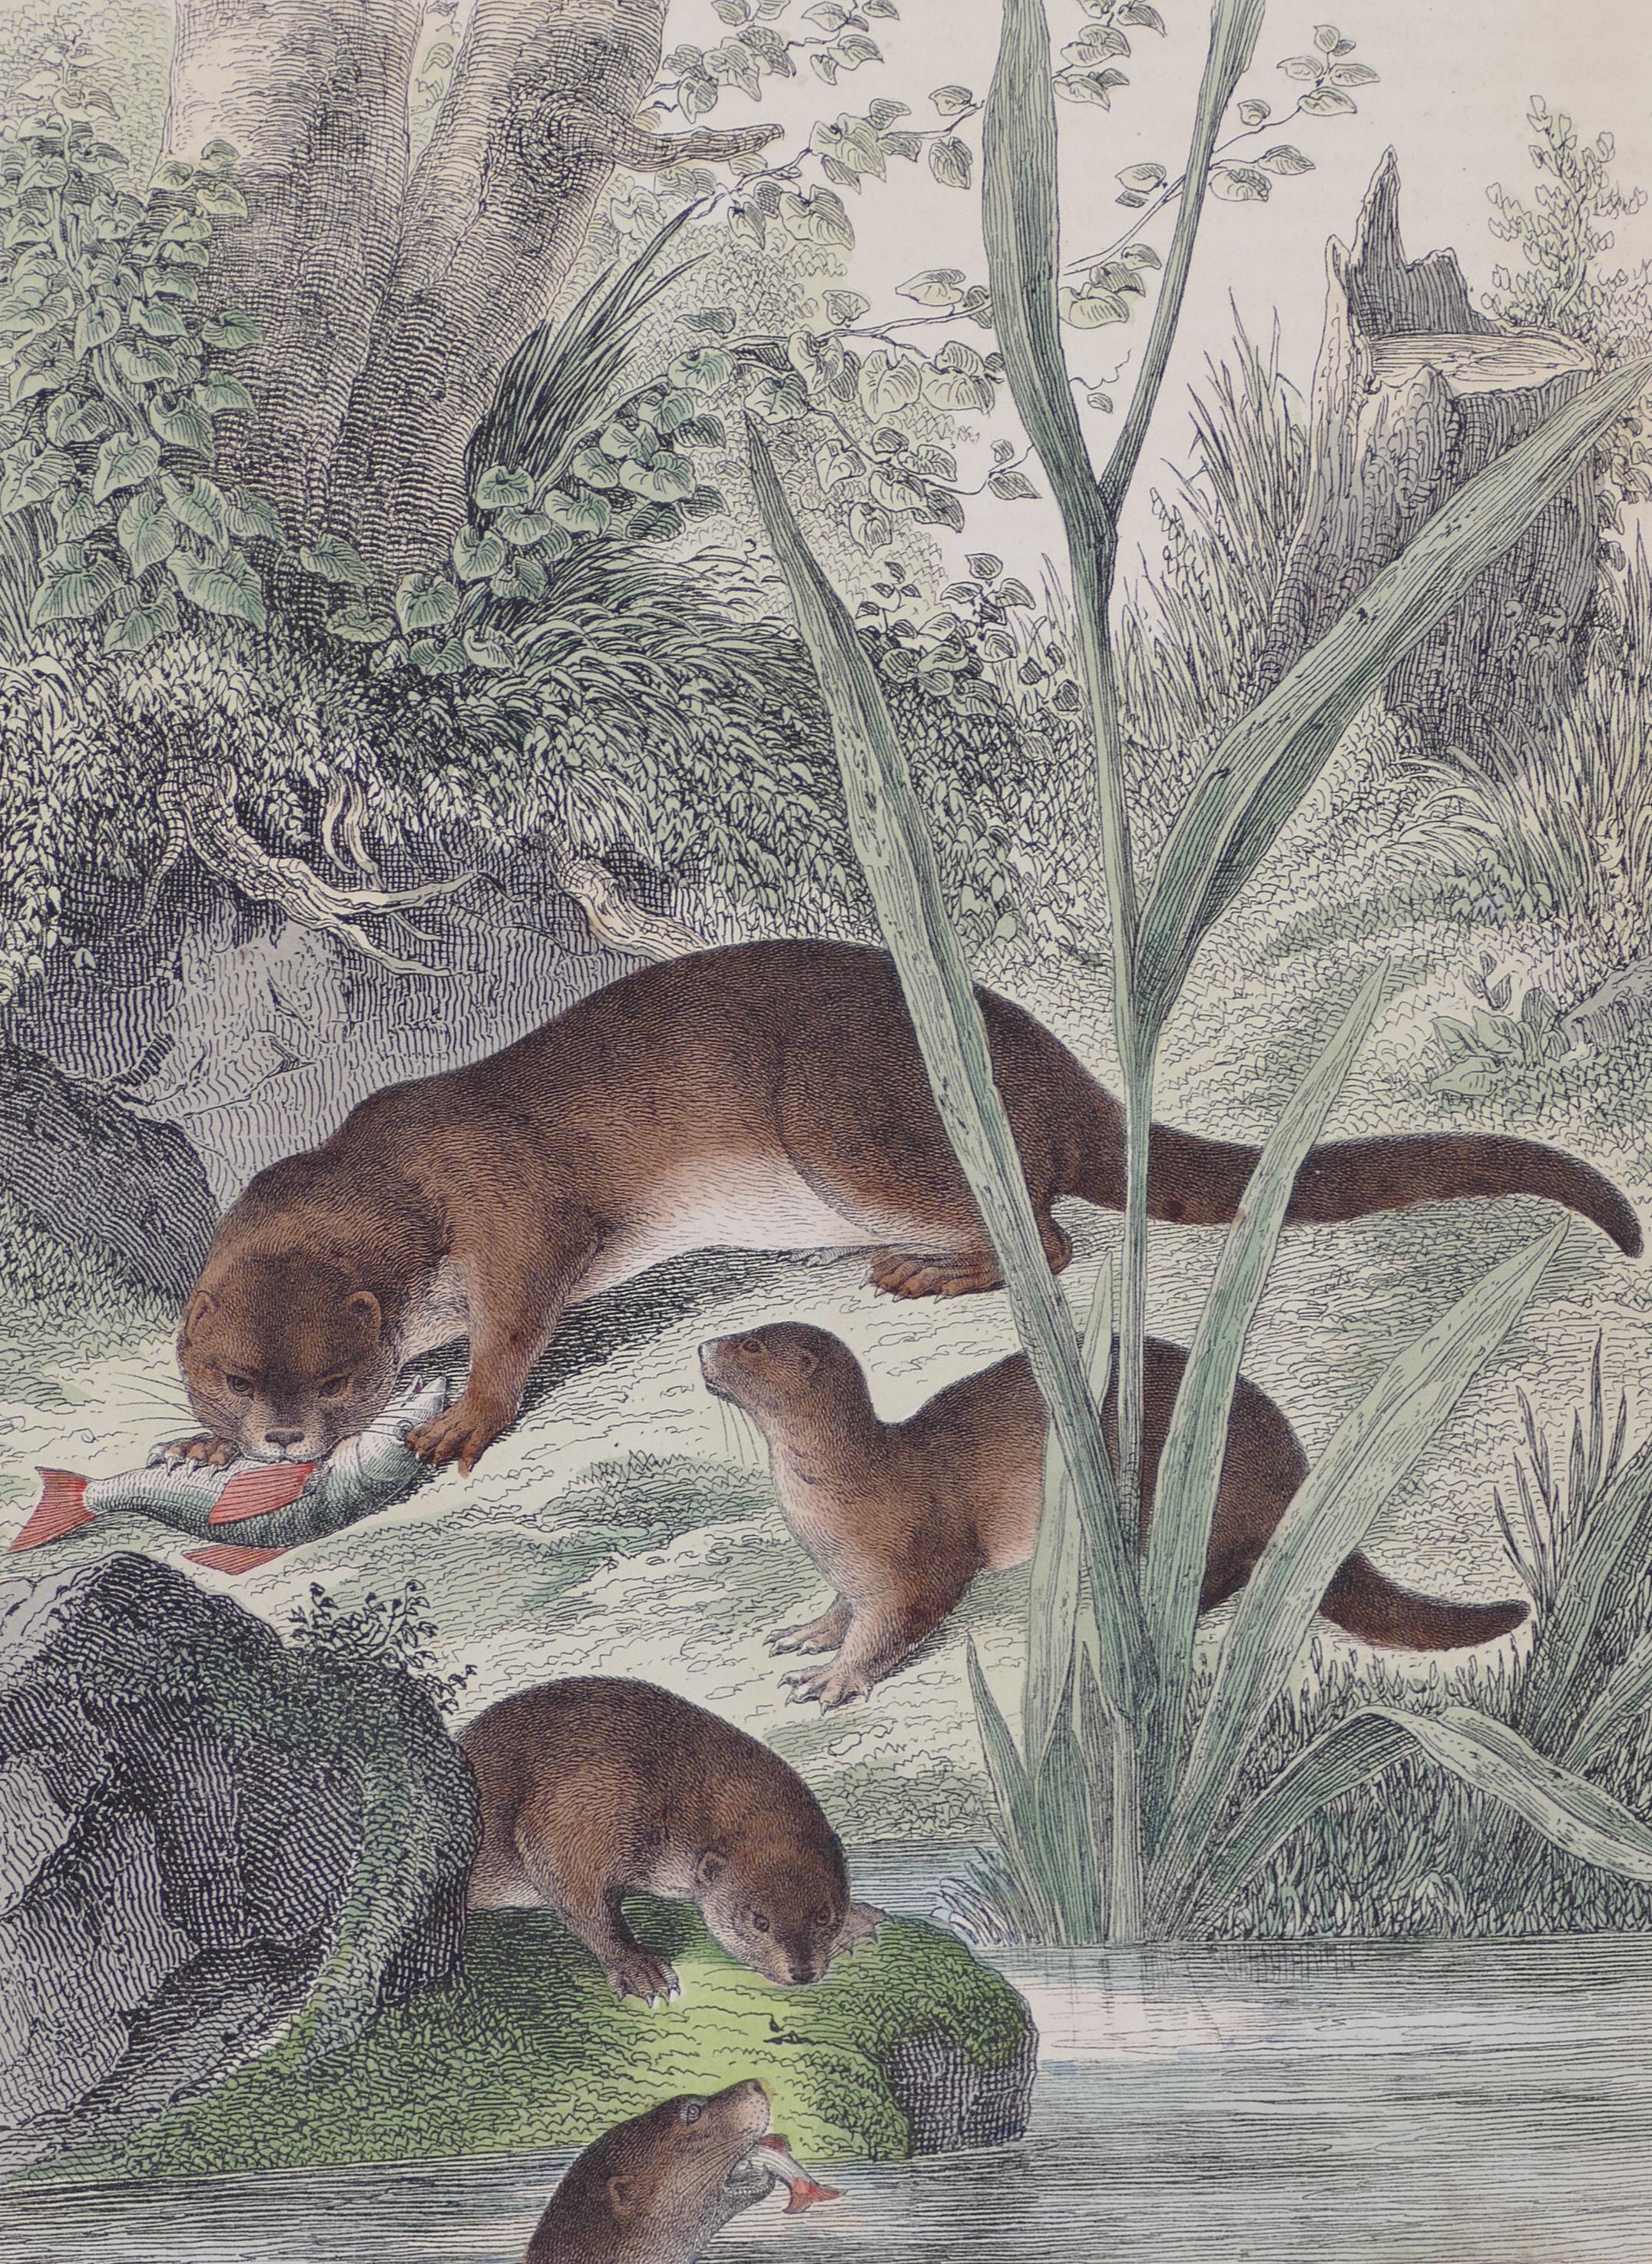 Image dimensioni: 20 x 15 cm.

Eurasian Otters is a color lithograph realized by an anonymous artist in 1860.

Original Title in pencil on the lower left corner: Fischotter. Dated 1860, p. 6. 

Good conditions, except for a usual yellowing of the